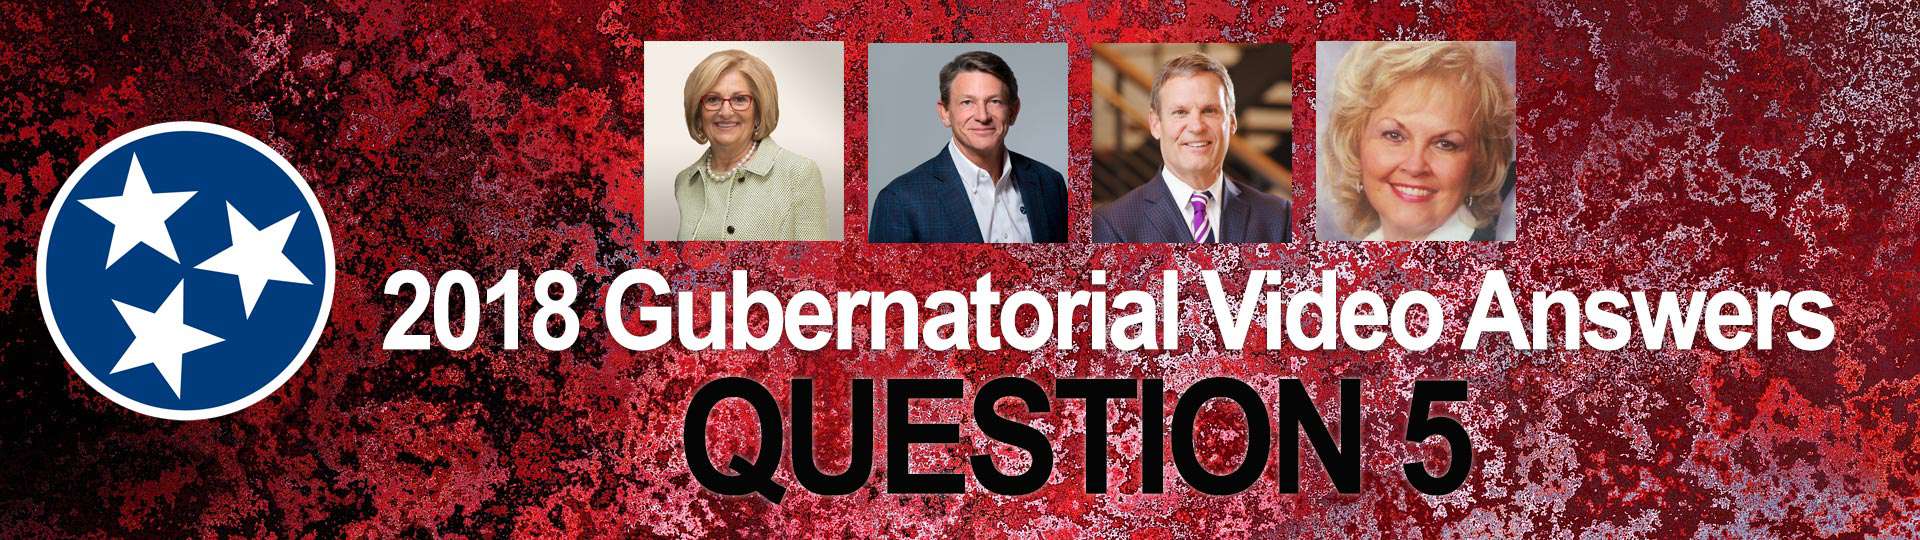 Tennessee's gubernatorial candidates answers to video question 5